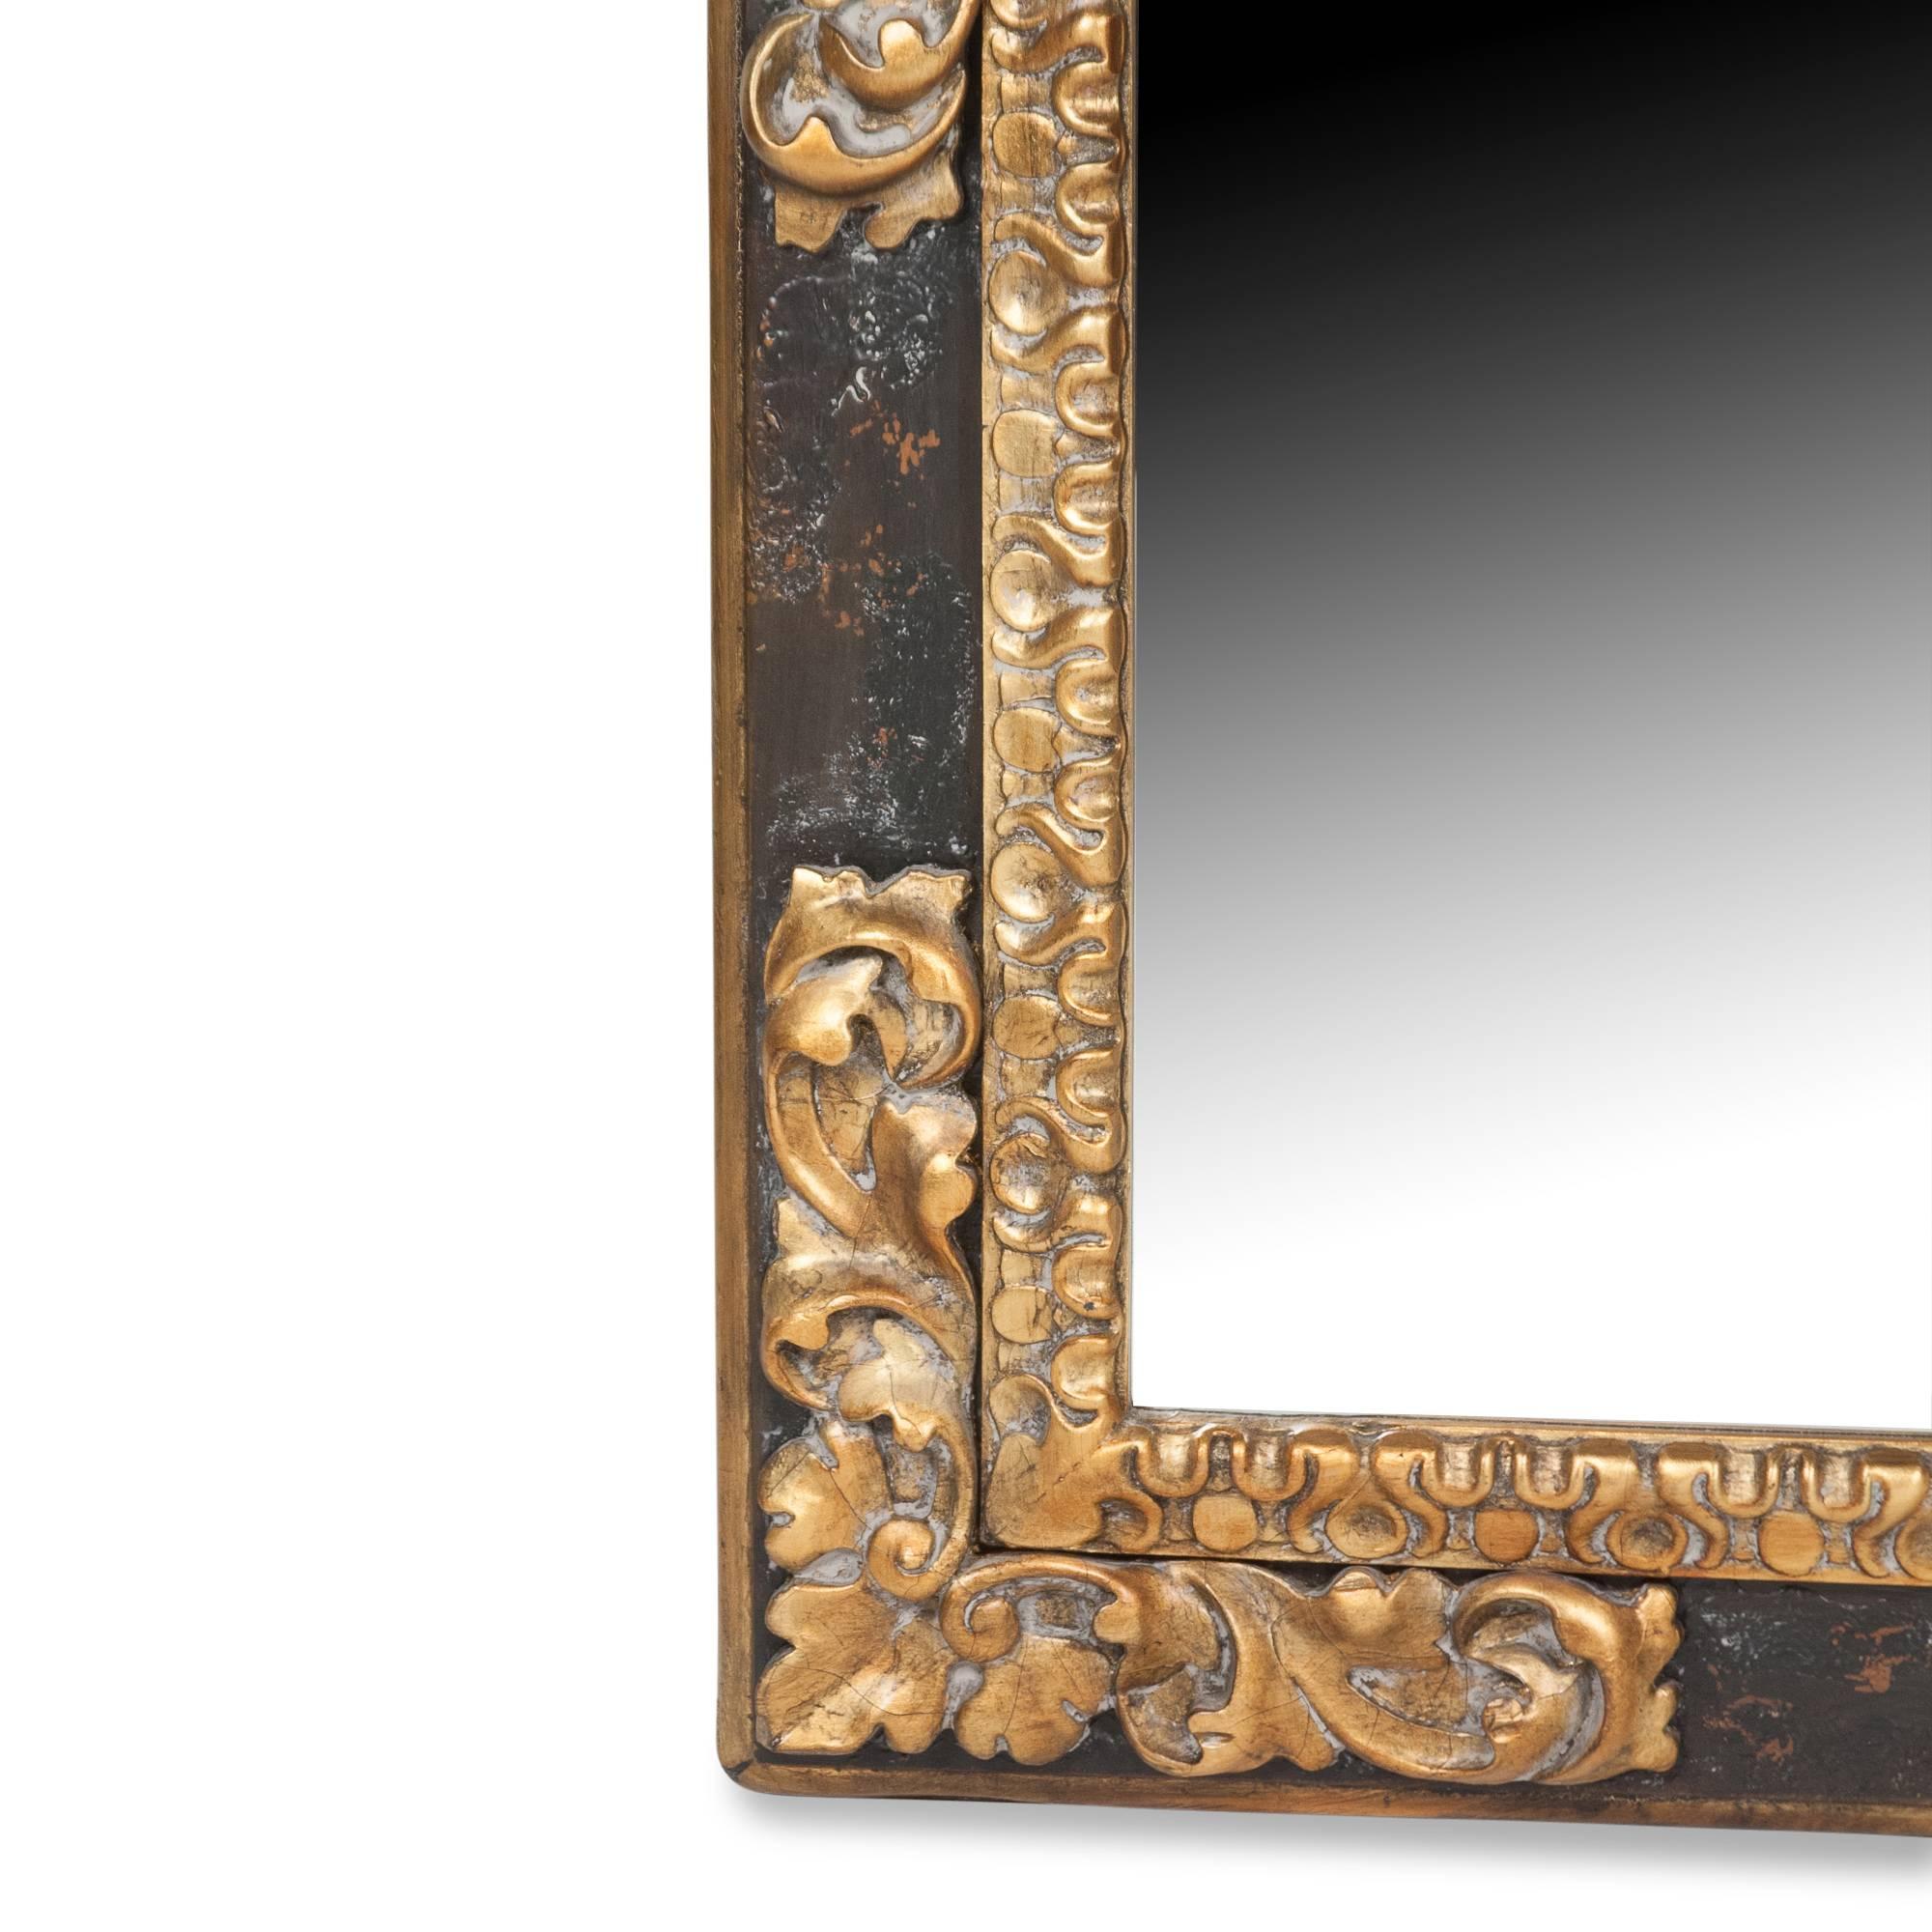 Carved wood gilt and painted frame mirror, beveled edge, American circa 2000. 52 x 43 in, depth 3 in. (Item #2367)